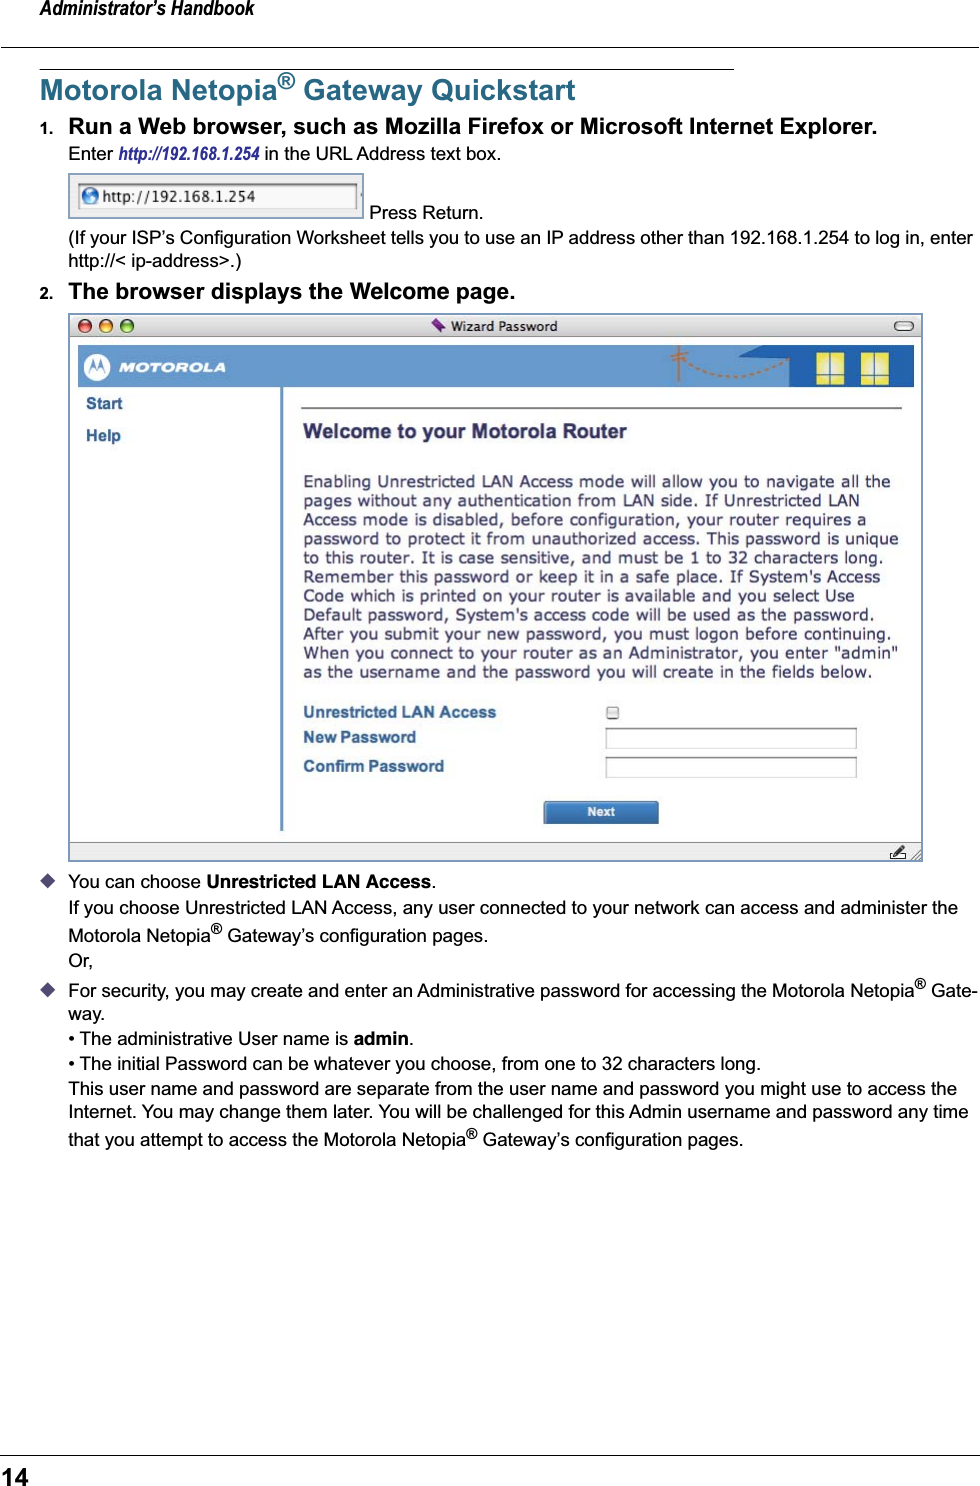 Administrator’s Handbook14Motorola Netopia® Gateway Quickstart1. Run a Web browser, such as Mozilla Firefox or Microsoft Internet Explorer.Enter http://192.168.1.254 in the URL Address text box.  Press Return.(If your ISP’s Configuration Worksheet tells you to use an IP address other than 192.168.1.254 to log in, enter http://&lt; ip-address&gt;.)2. The browser displays the Welcome page.◆You can choose Unrestricted LAN Access.If you choose Unrestricted LAN Access, any user connected to your network can access and administer the Motorola Netopia® Gateway’s configuration pages.Or,◆For security, you may create and enter an Administrative password for accessing the Motorola Netopia® Gate-way.• The administrative User name is admin.• The initial Password can be whatever you choose, from one to 32 characters long.This user name and password are separate from the user name and password you might use to access the Internet. You may change them later. You will be challenged for this Admin username and password any time that you attempt to access the Motorola Netopia® Gateway’s configuration pages.